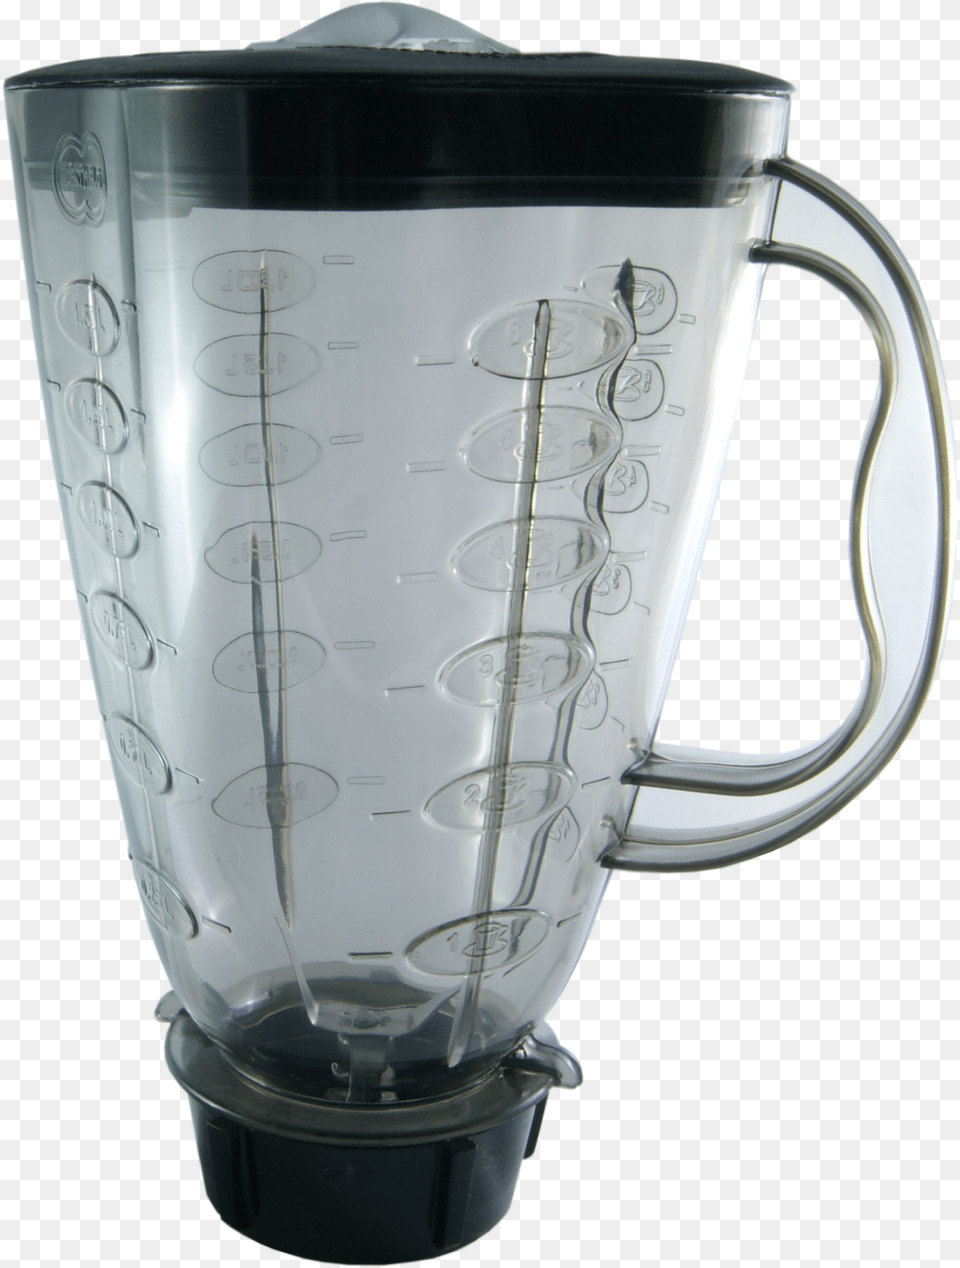 Vaso Oster Cube Completo Humo Mug, Cup, Appliance, Device, Electrical Device Free Transparent Png